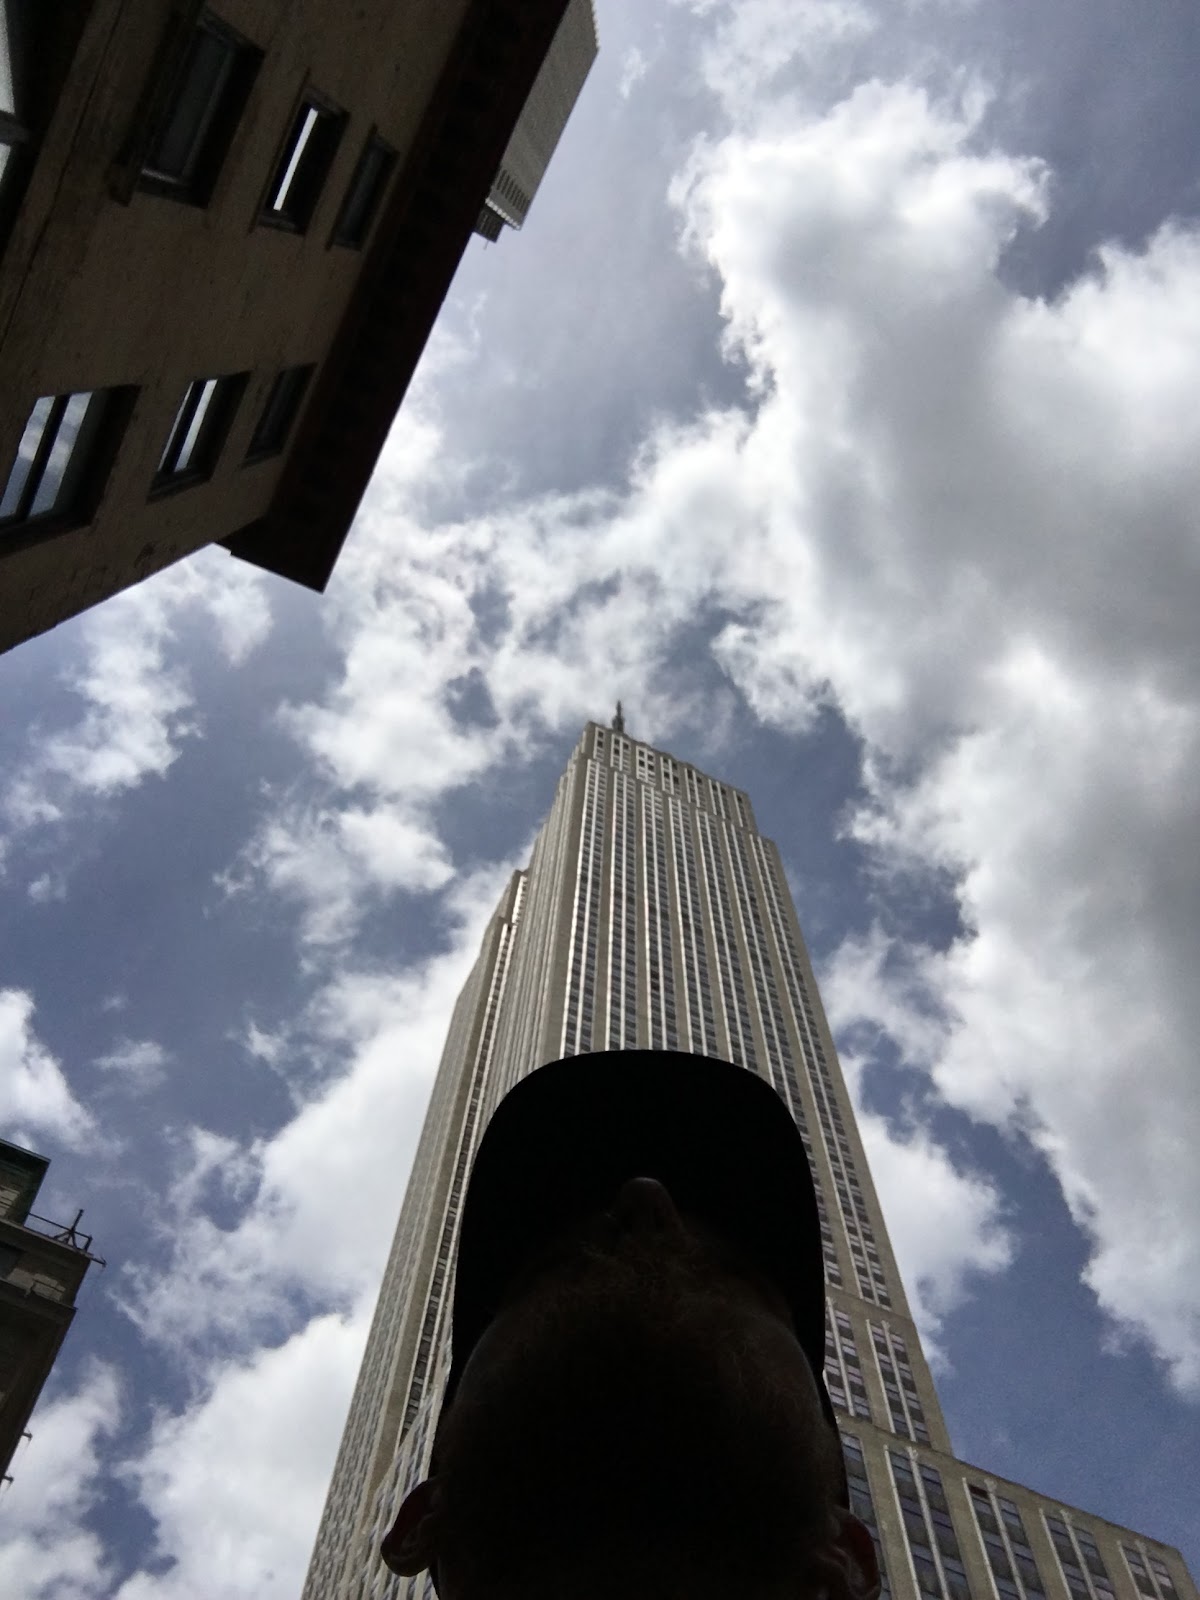 EMPIRE-STATE-BUILDING